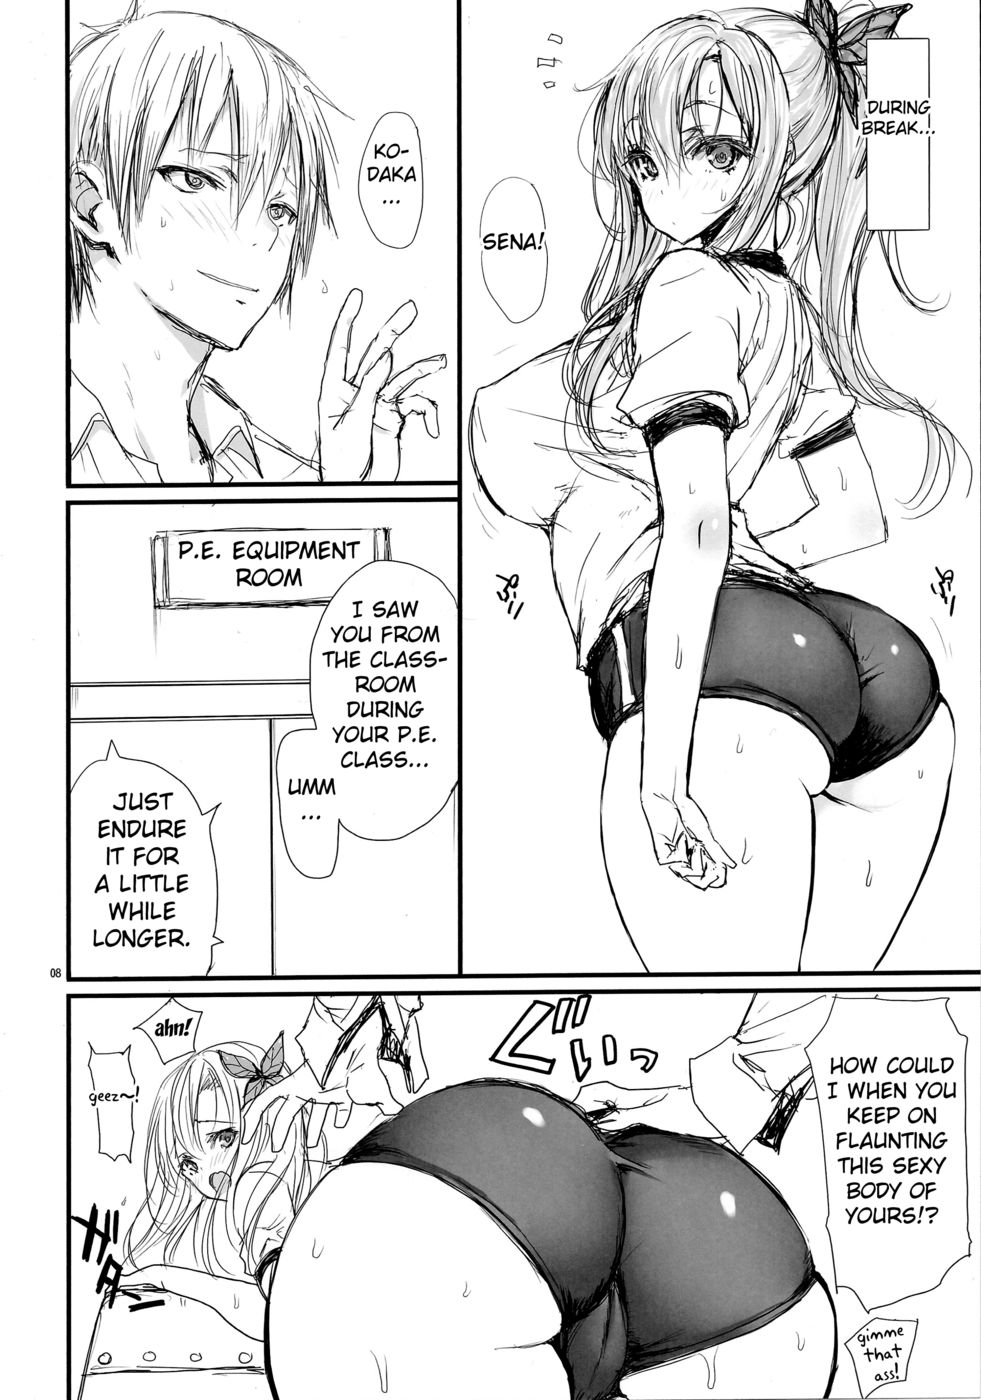 Hentai Manga Comic-Angels stroke 74 Meat x Meat, Meat and Wild Carnal Desires-Read-9